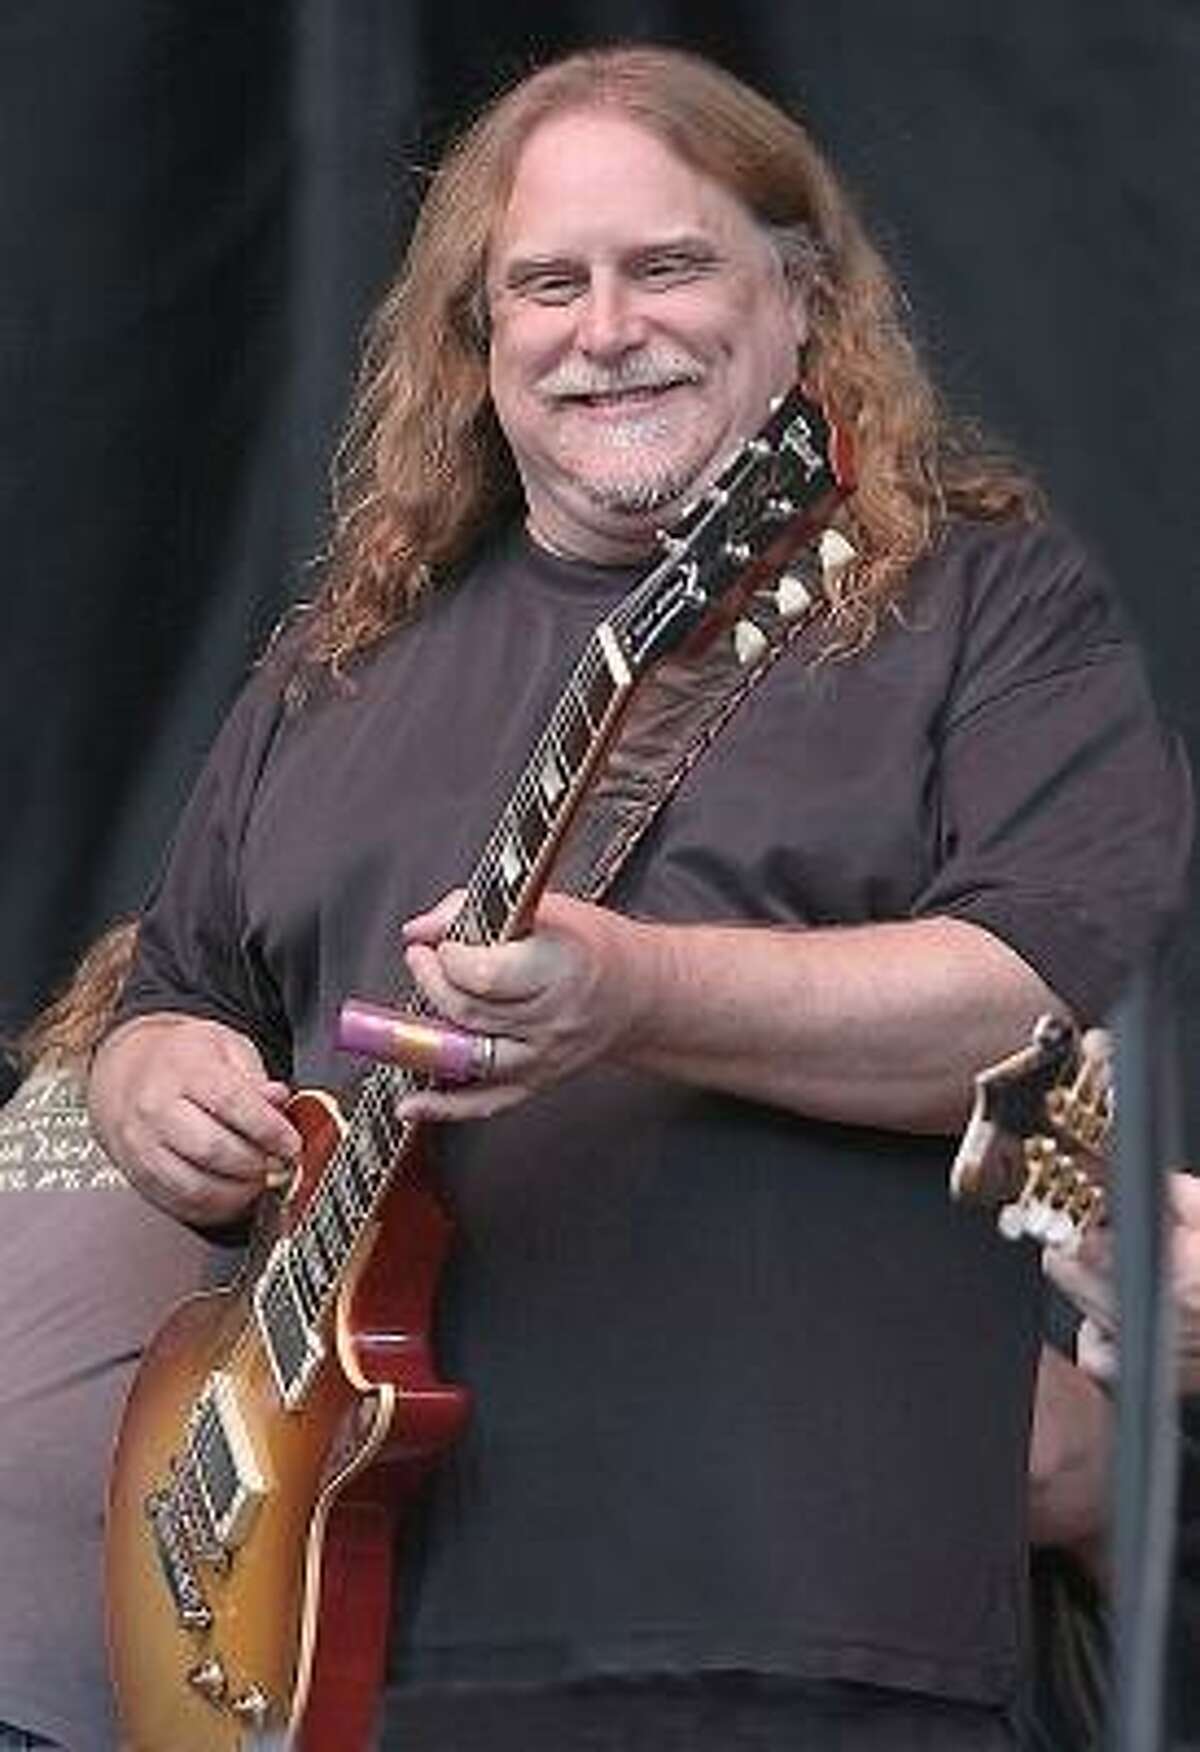 Guitarist, singer and songwriter Warren Haynes, founder of Gov't Mule and long time member of the Allman Brothers Band, is shown on stage performing during Mountain Jam in Hunter, New York.